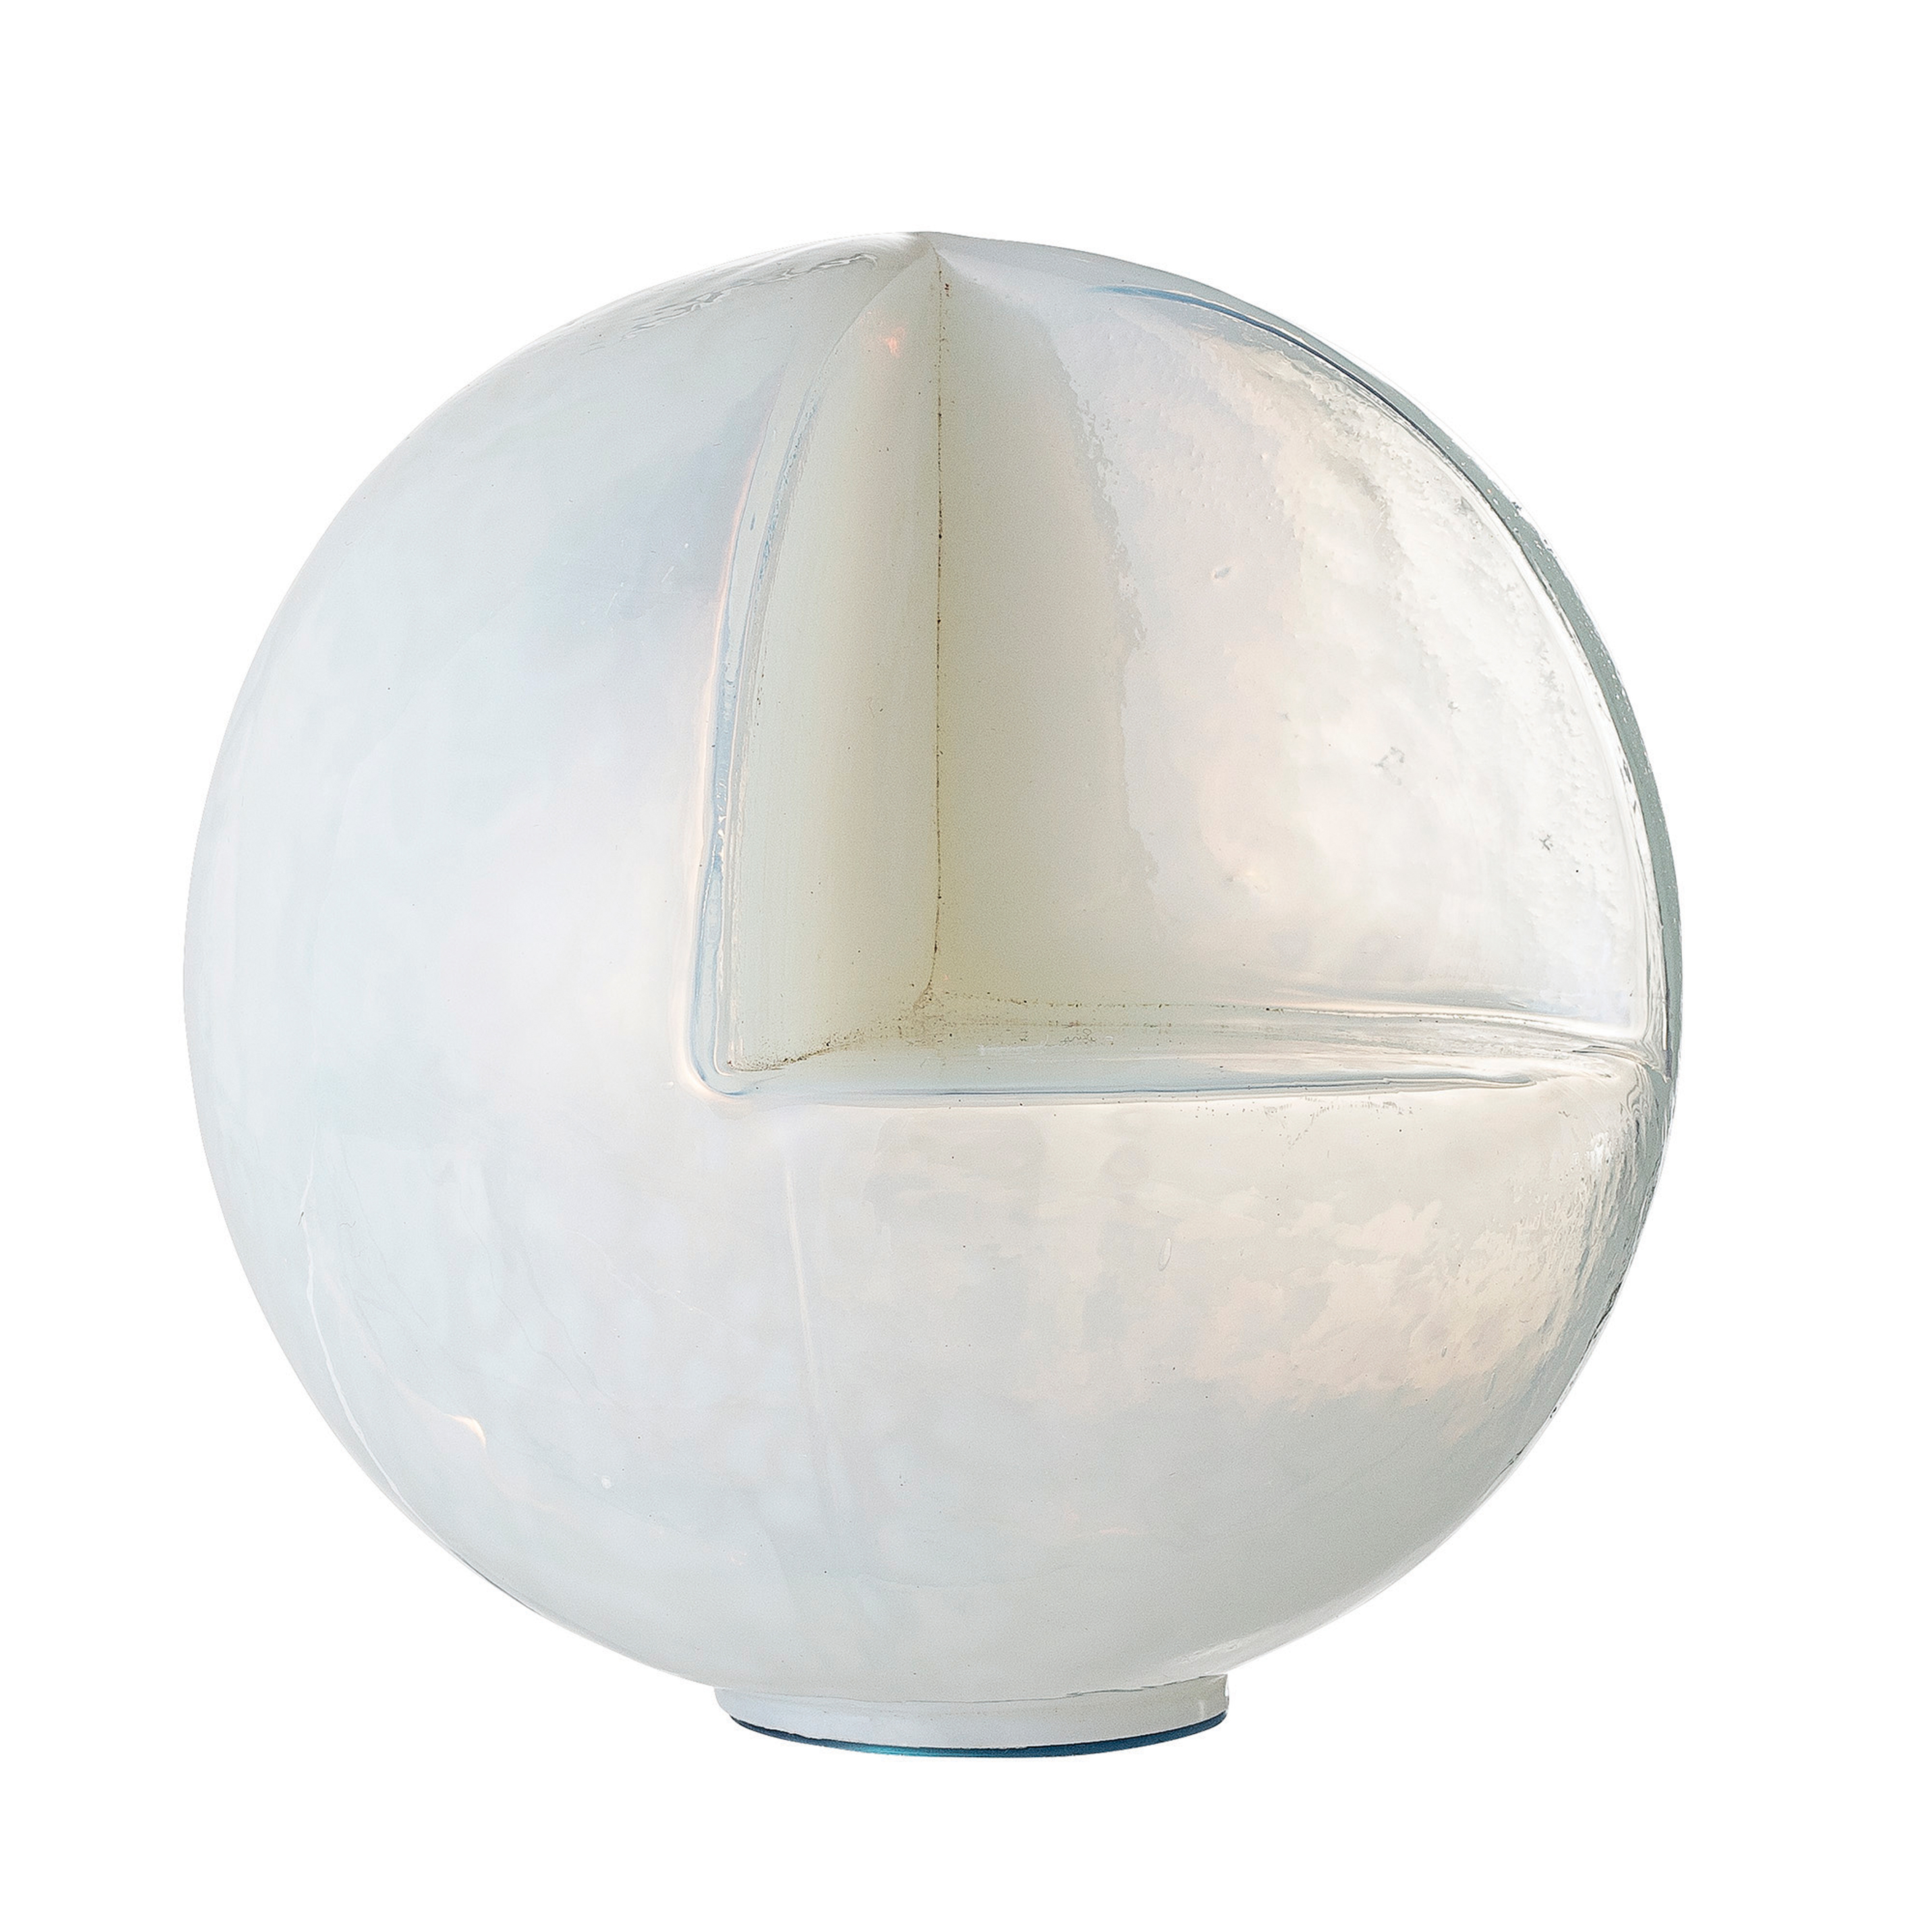 5.5"R Glass Sphere-Shaped Candleholder with Cut Out Ledge - Moss & Wilder